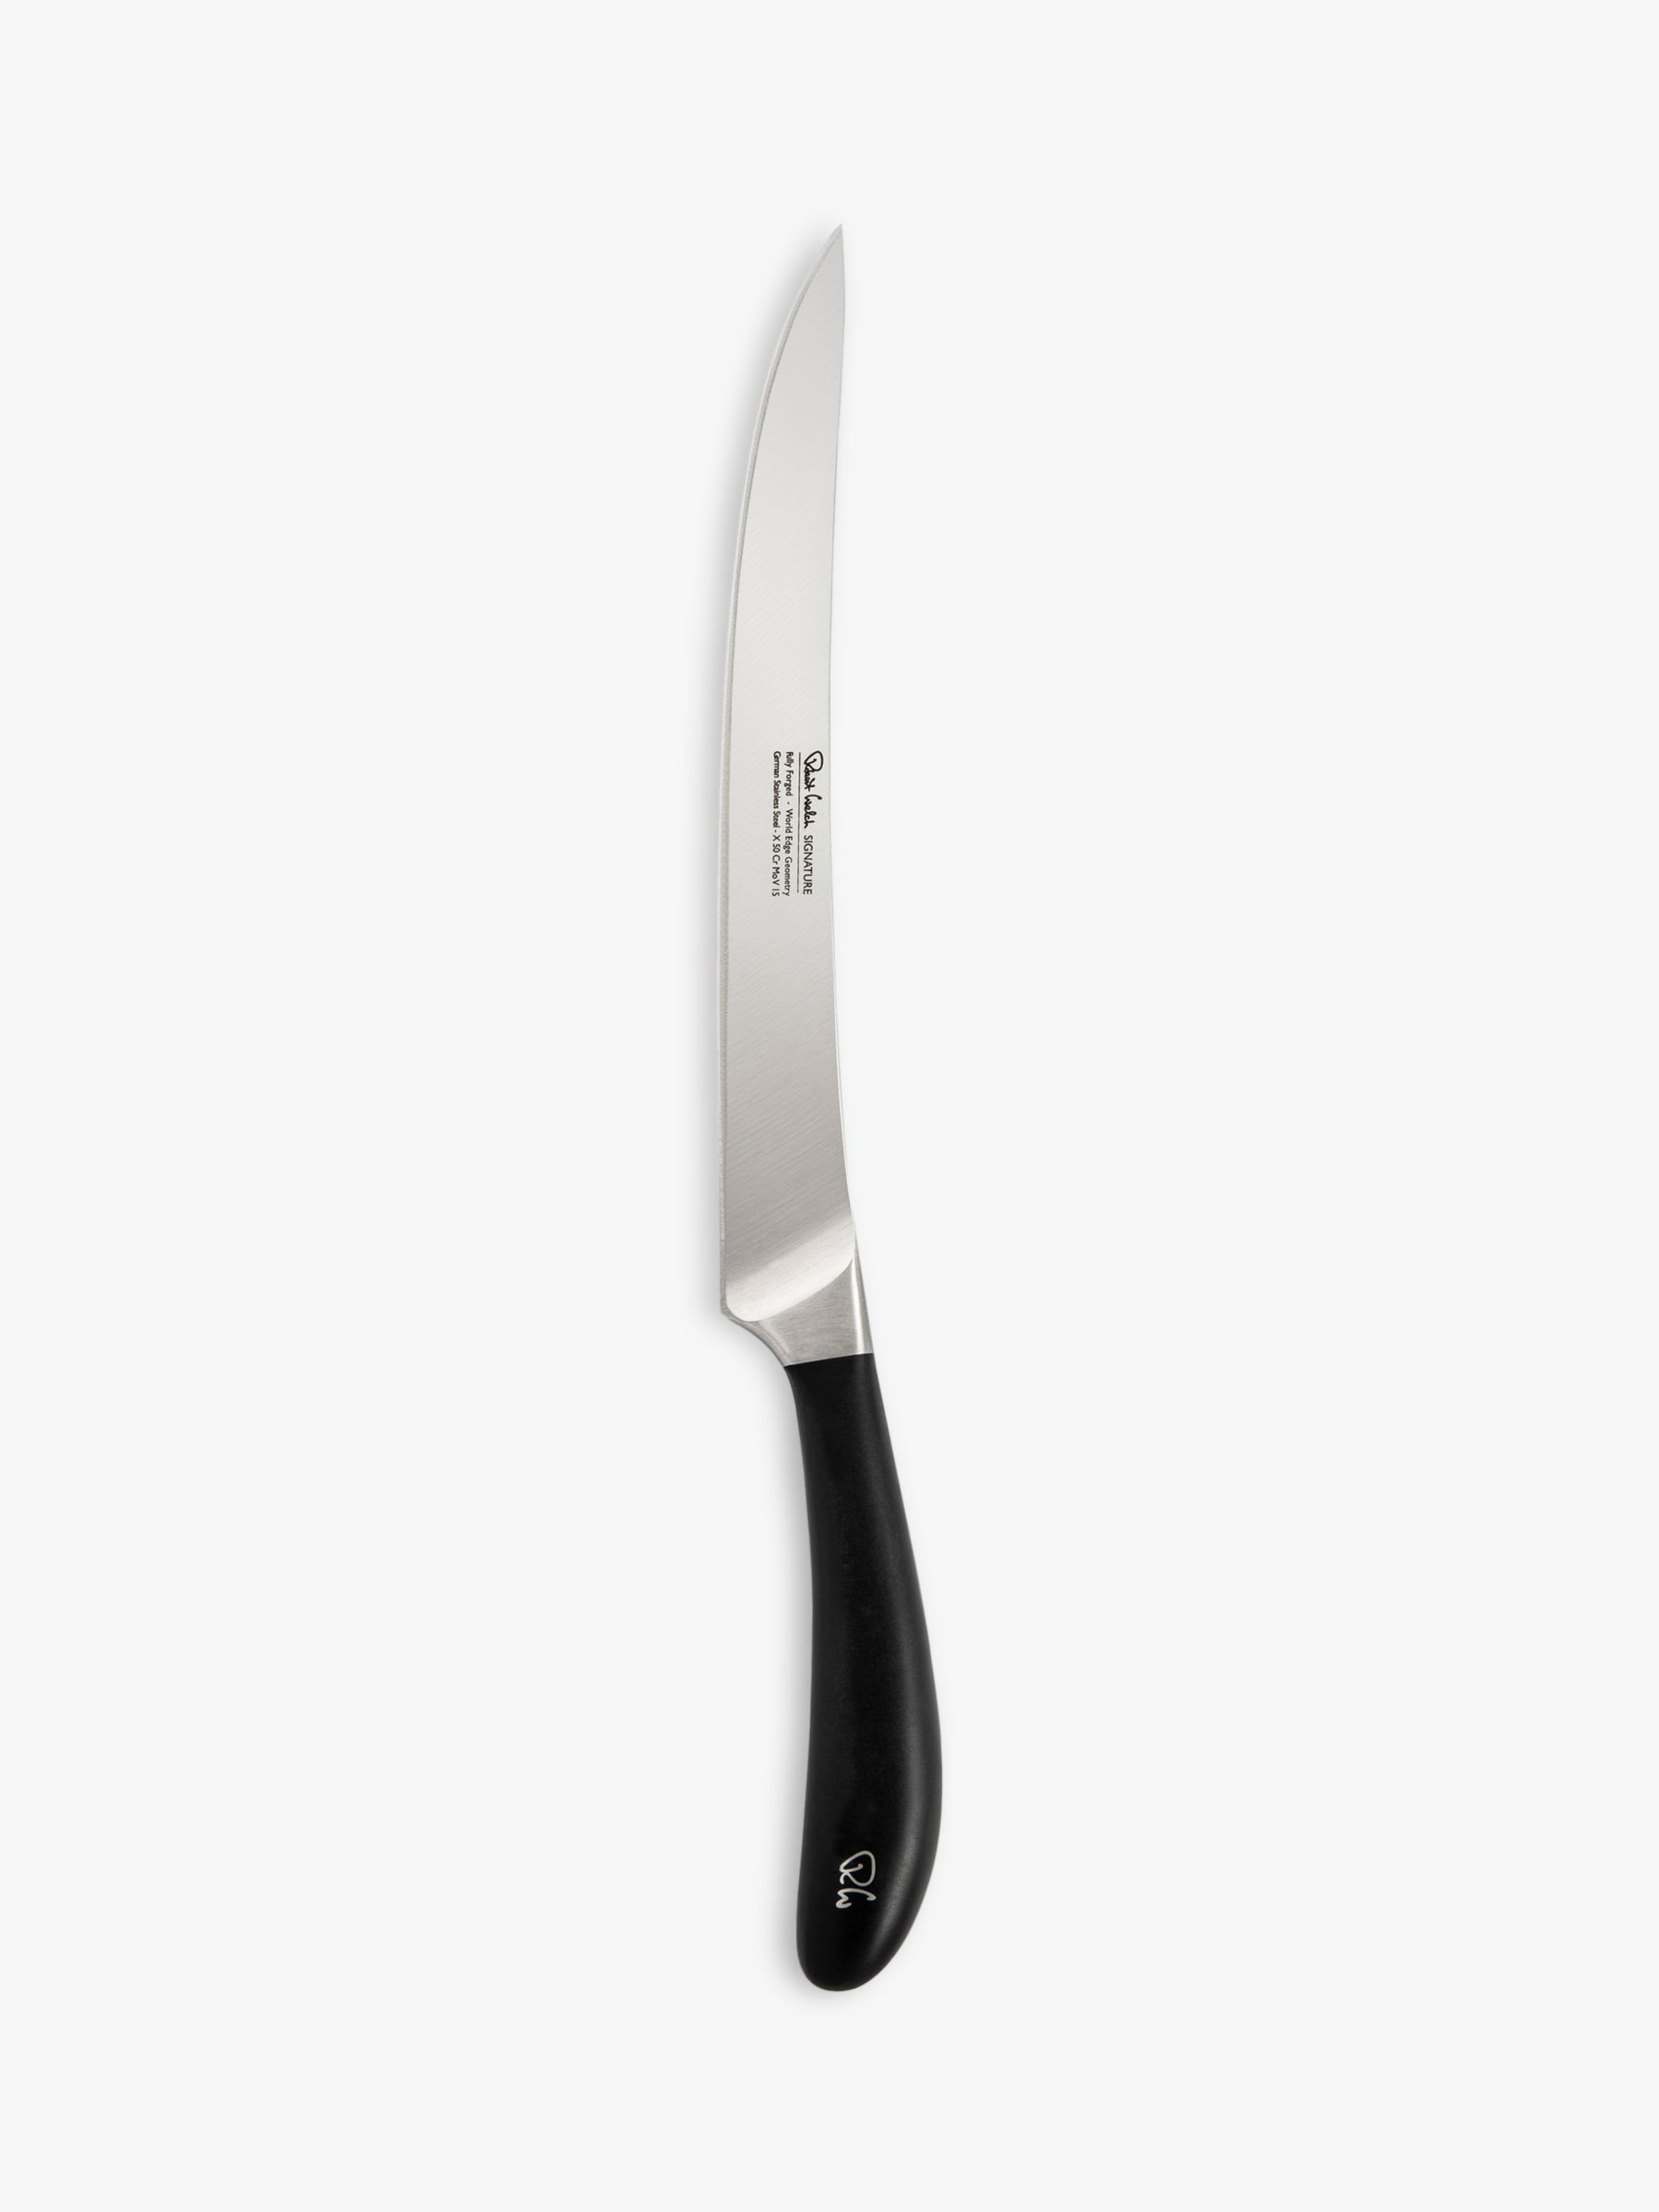 Signature Carving Knife, 23cm